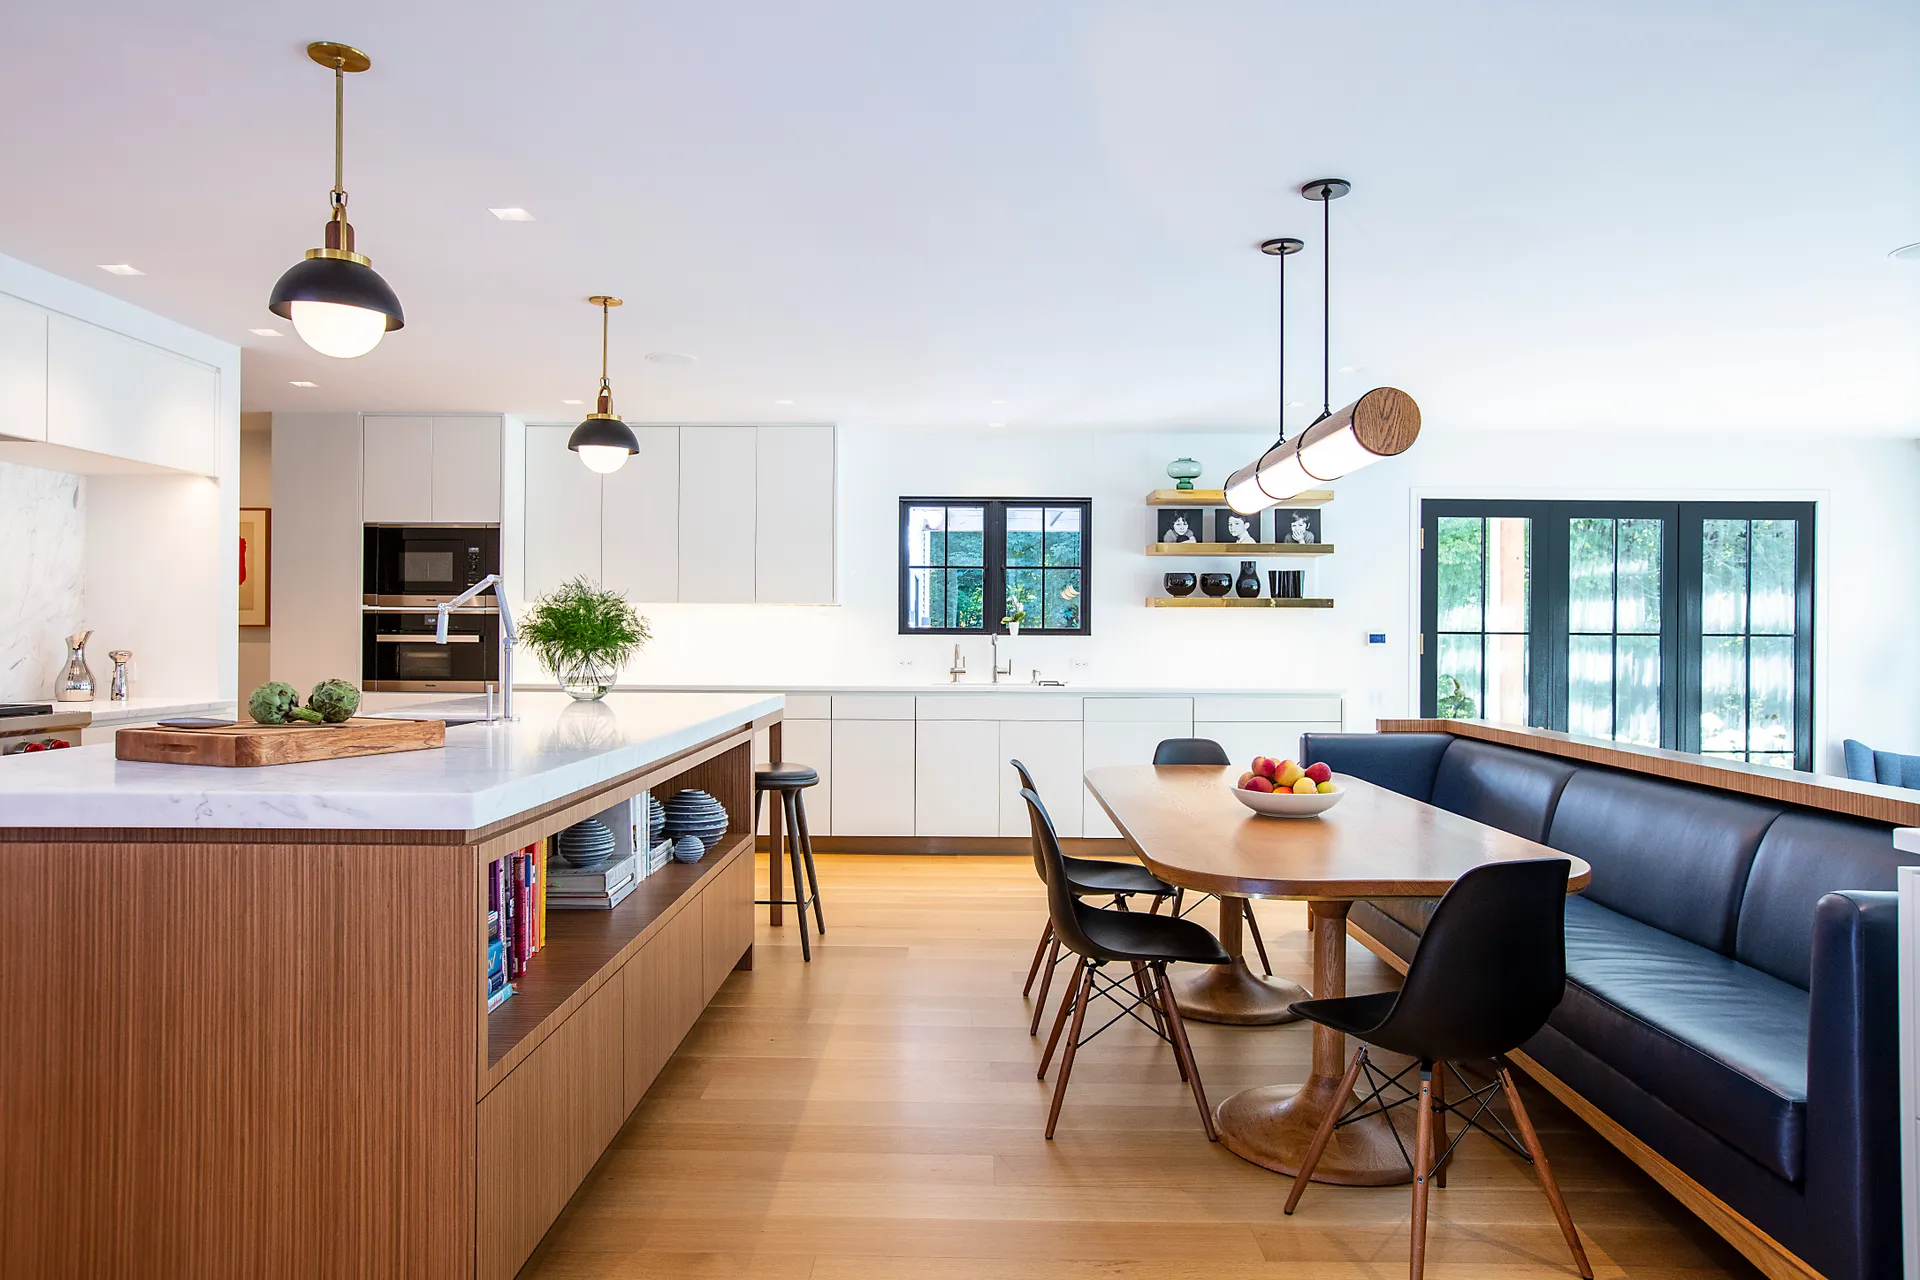 21 Minimalist Kitchens That Are Simply Chic